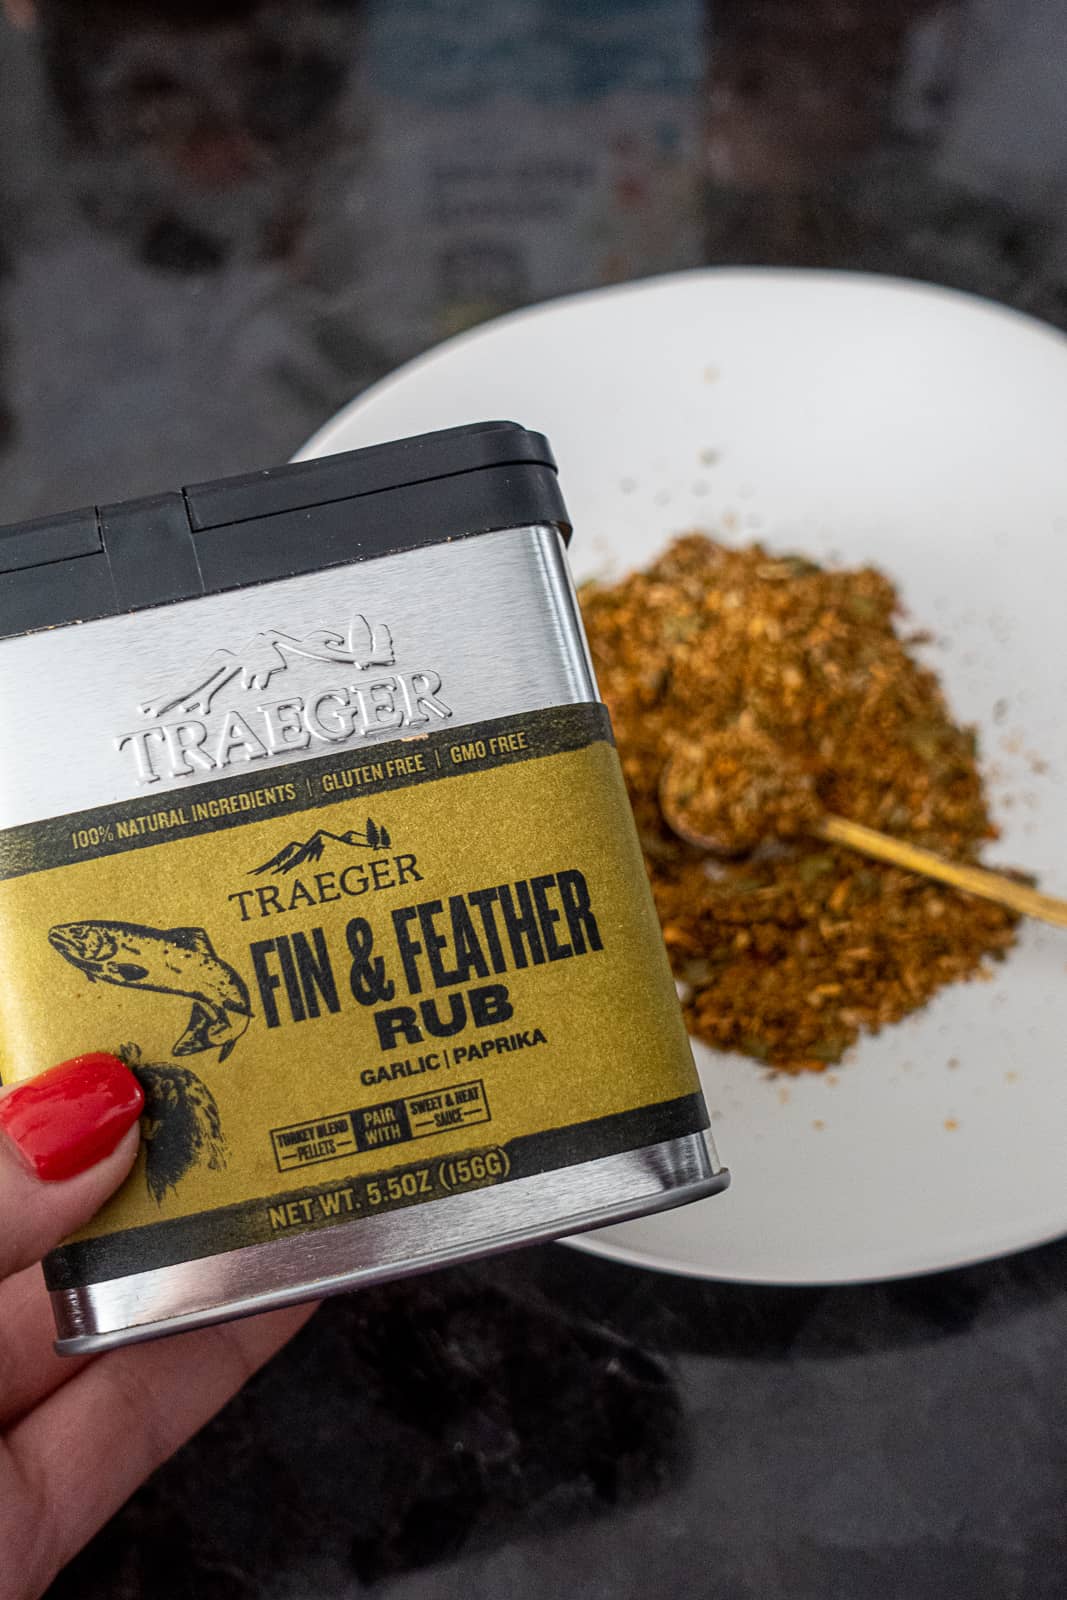 Can of Signature Traeger Fin And Feather Rub with spices on plate in background